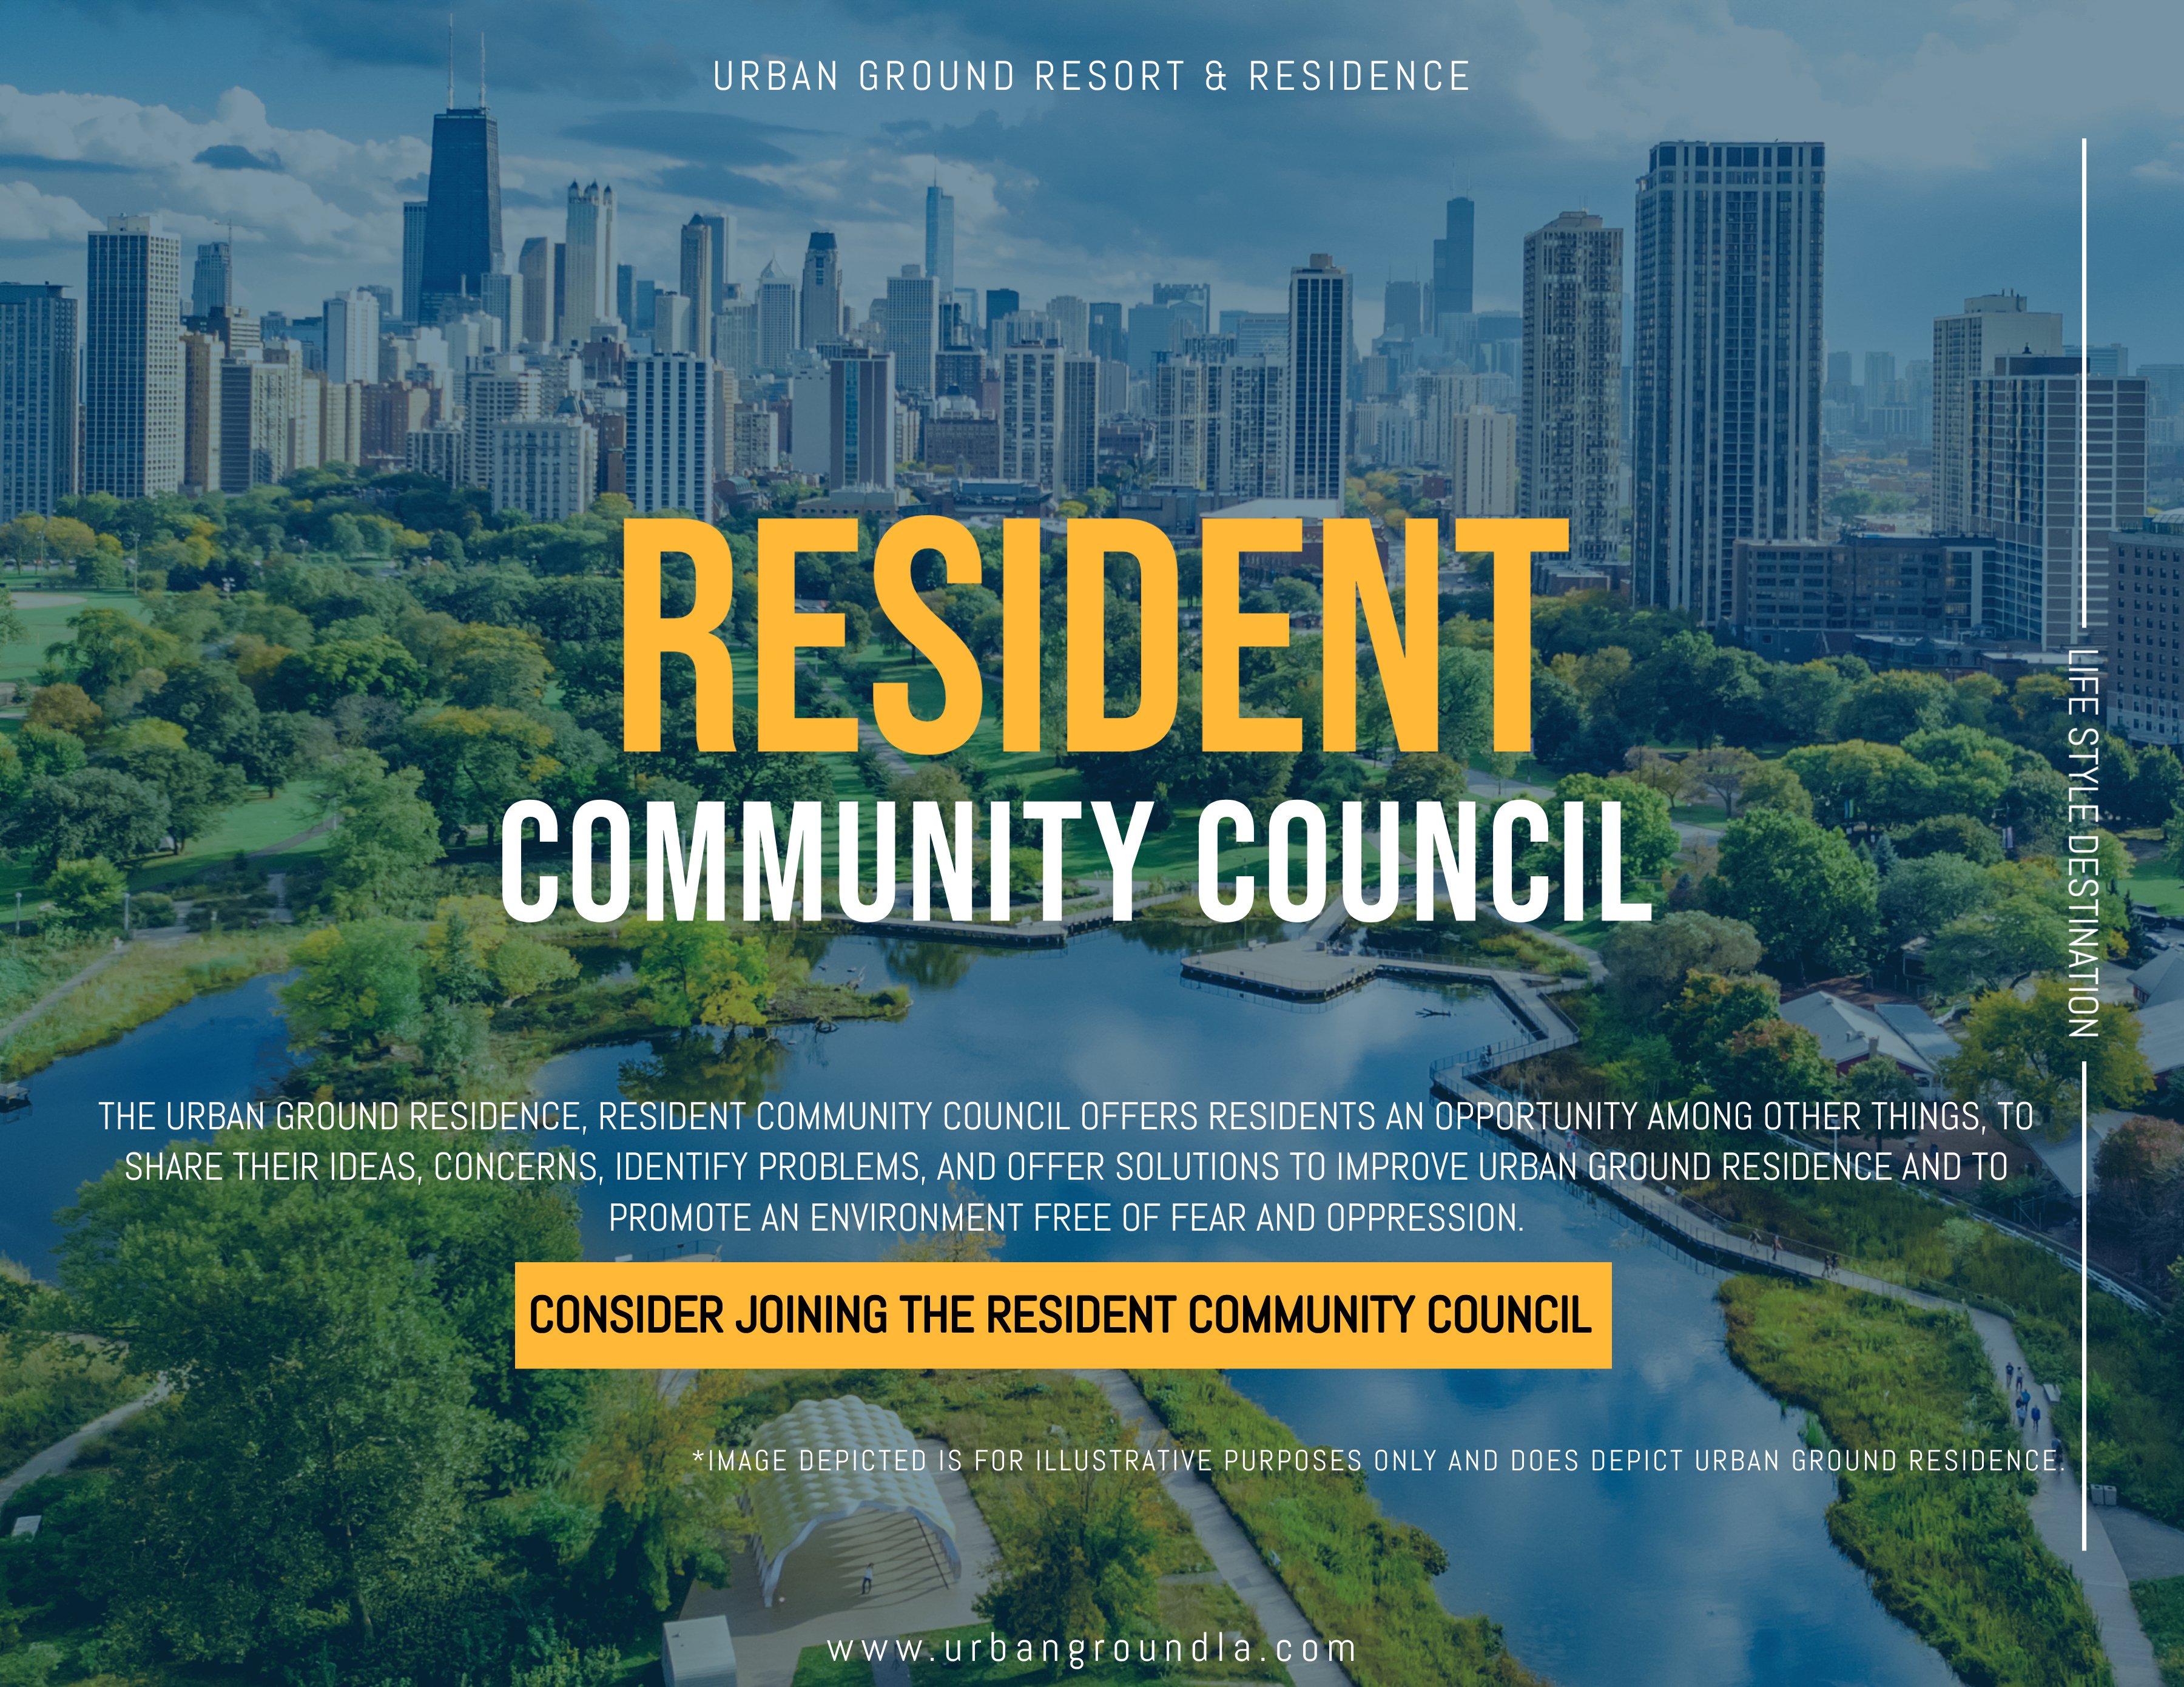 Urban Ground Residence Resident Community Council